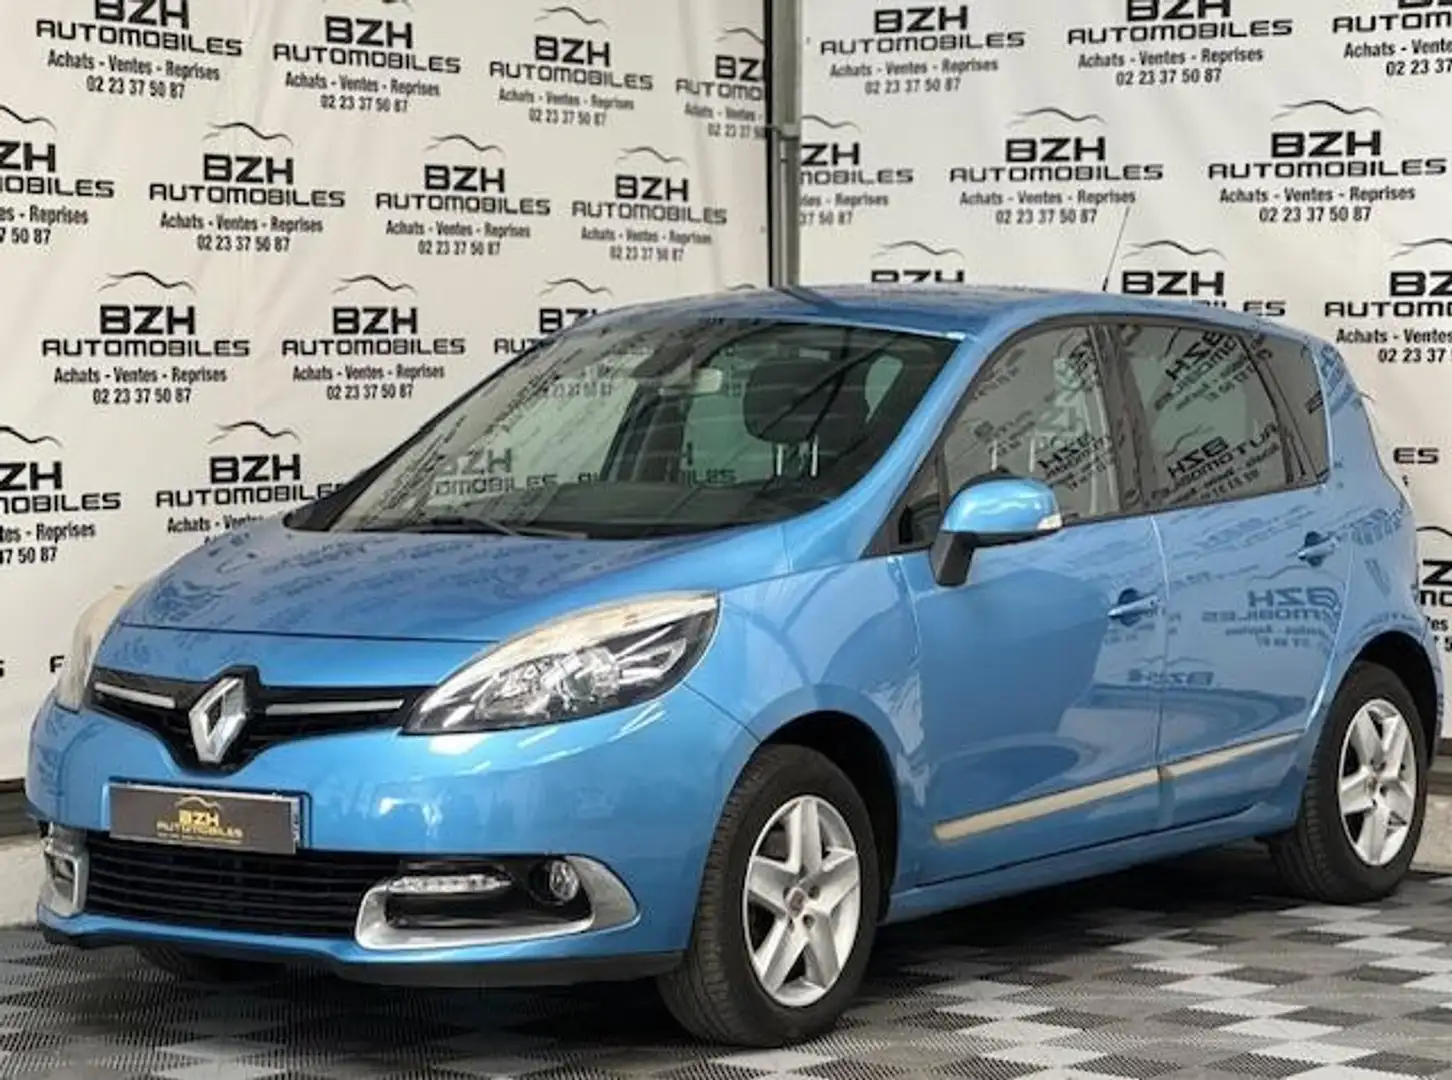 Renault Scenic 1.5 DCI 110CH BUSINESS 2015 EDC - 1